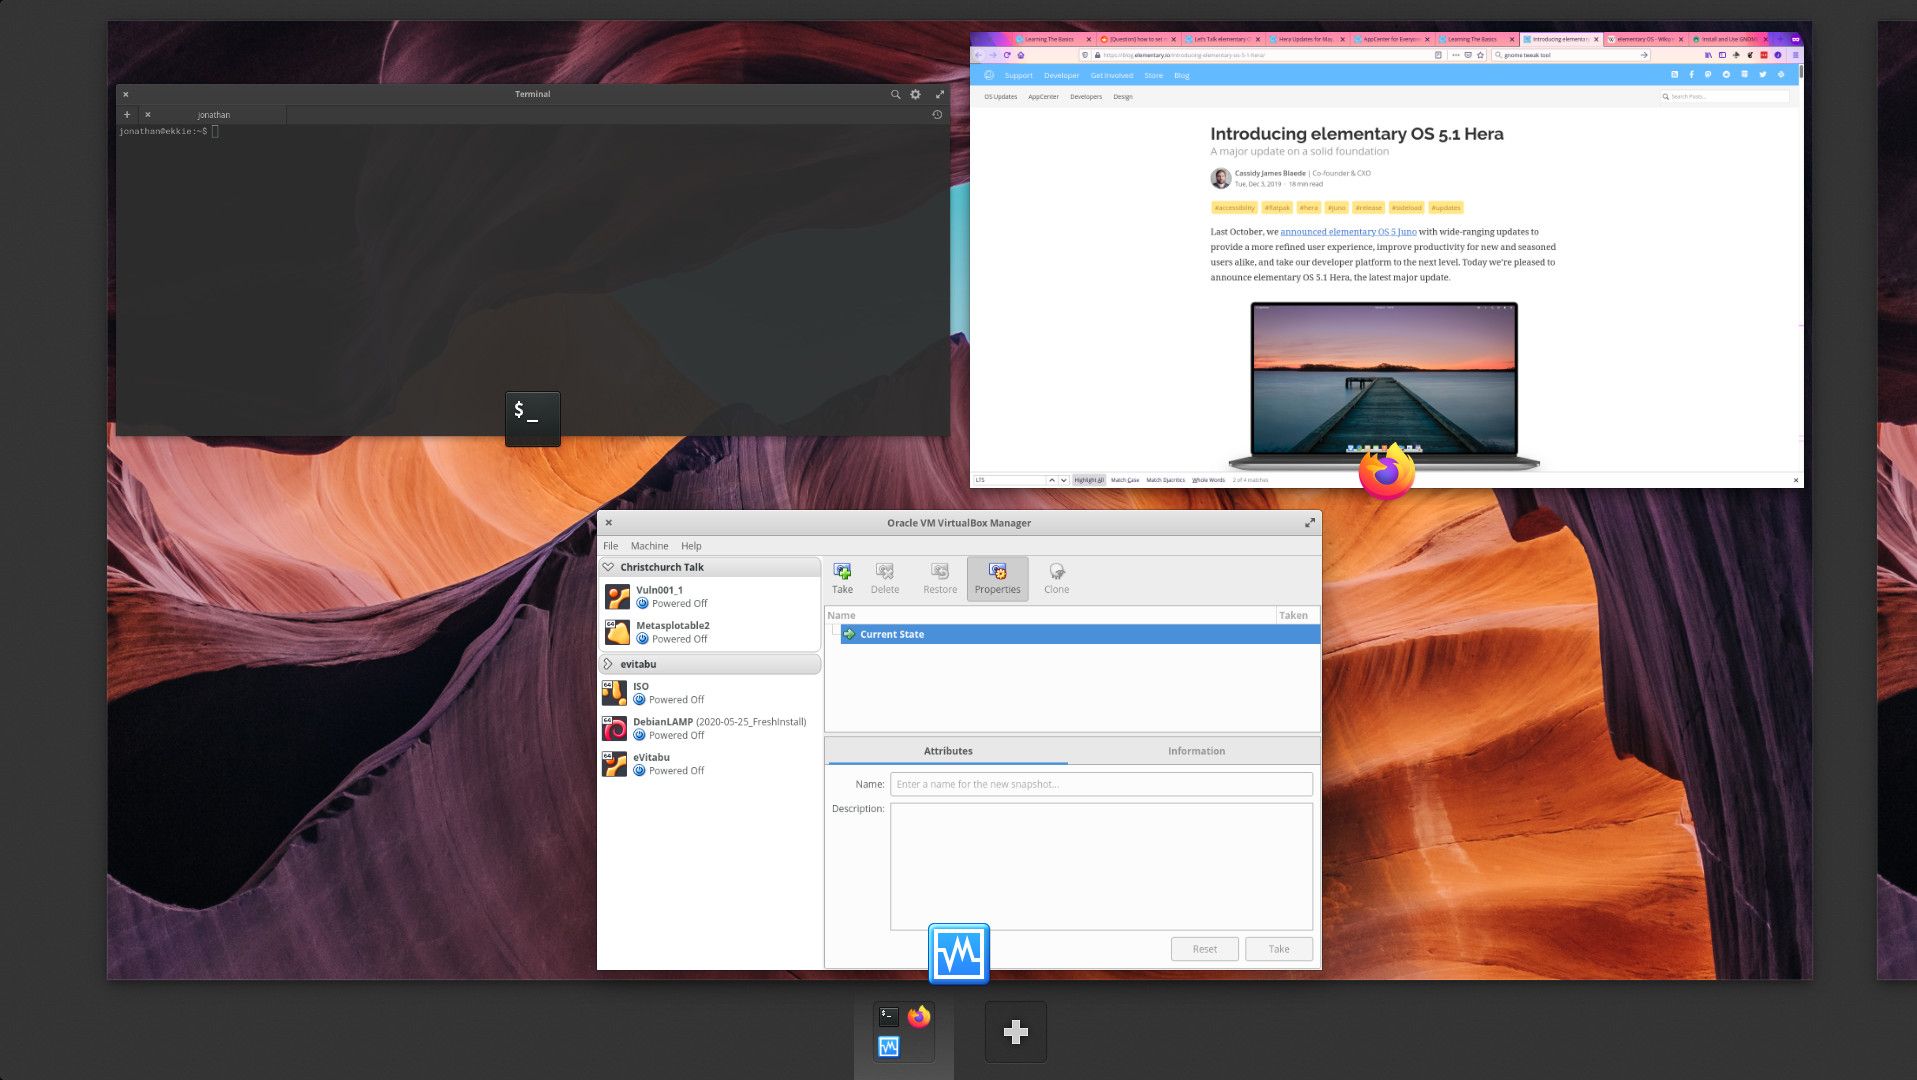 Screenshot of multitasking view, showing three open windows scaled on the screen.